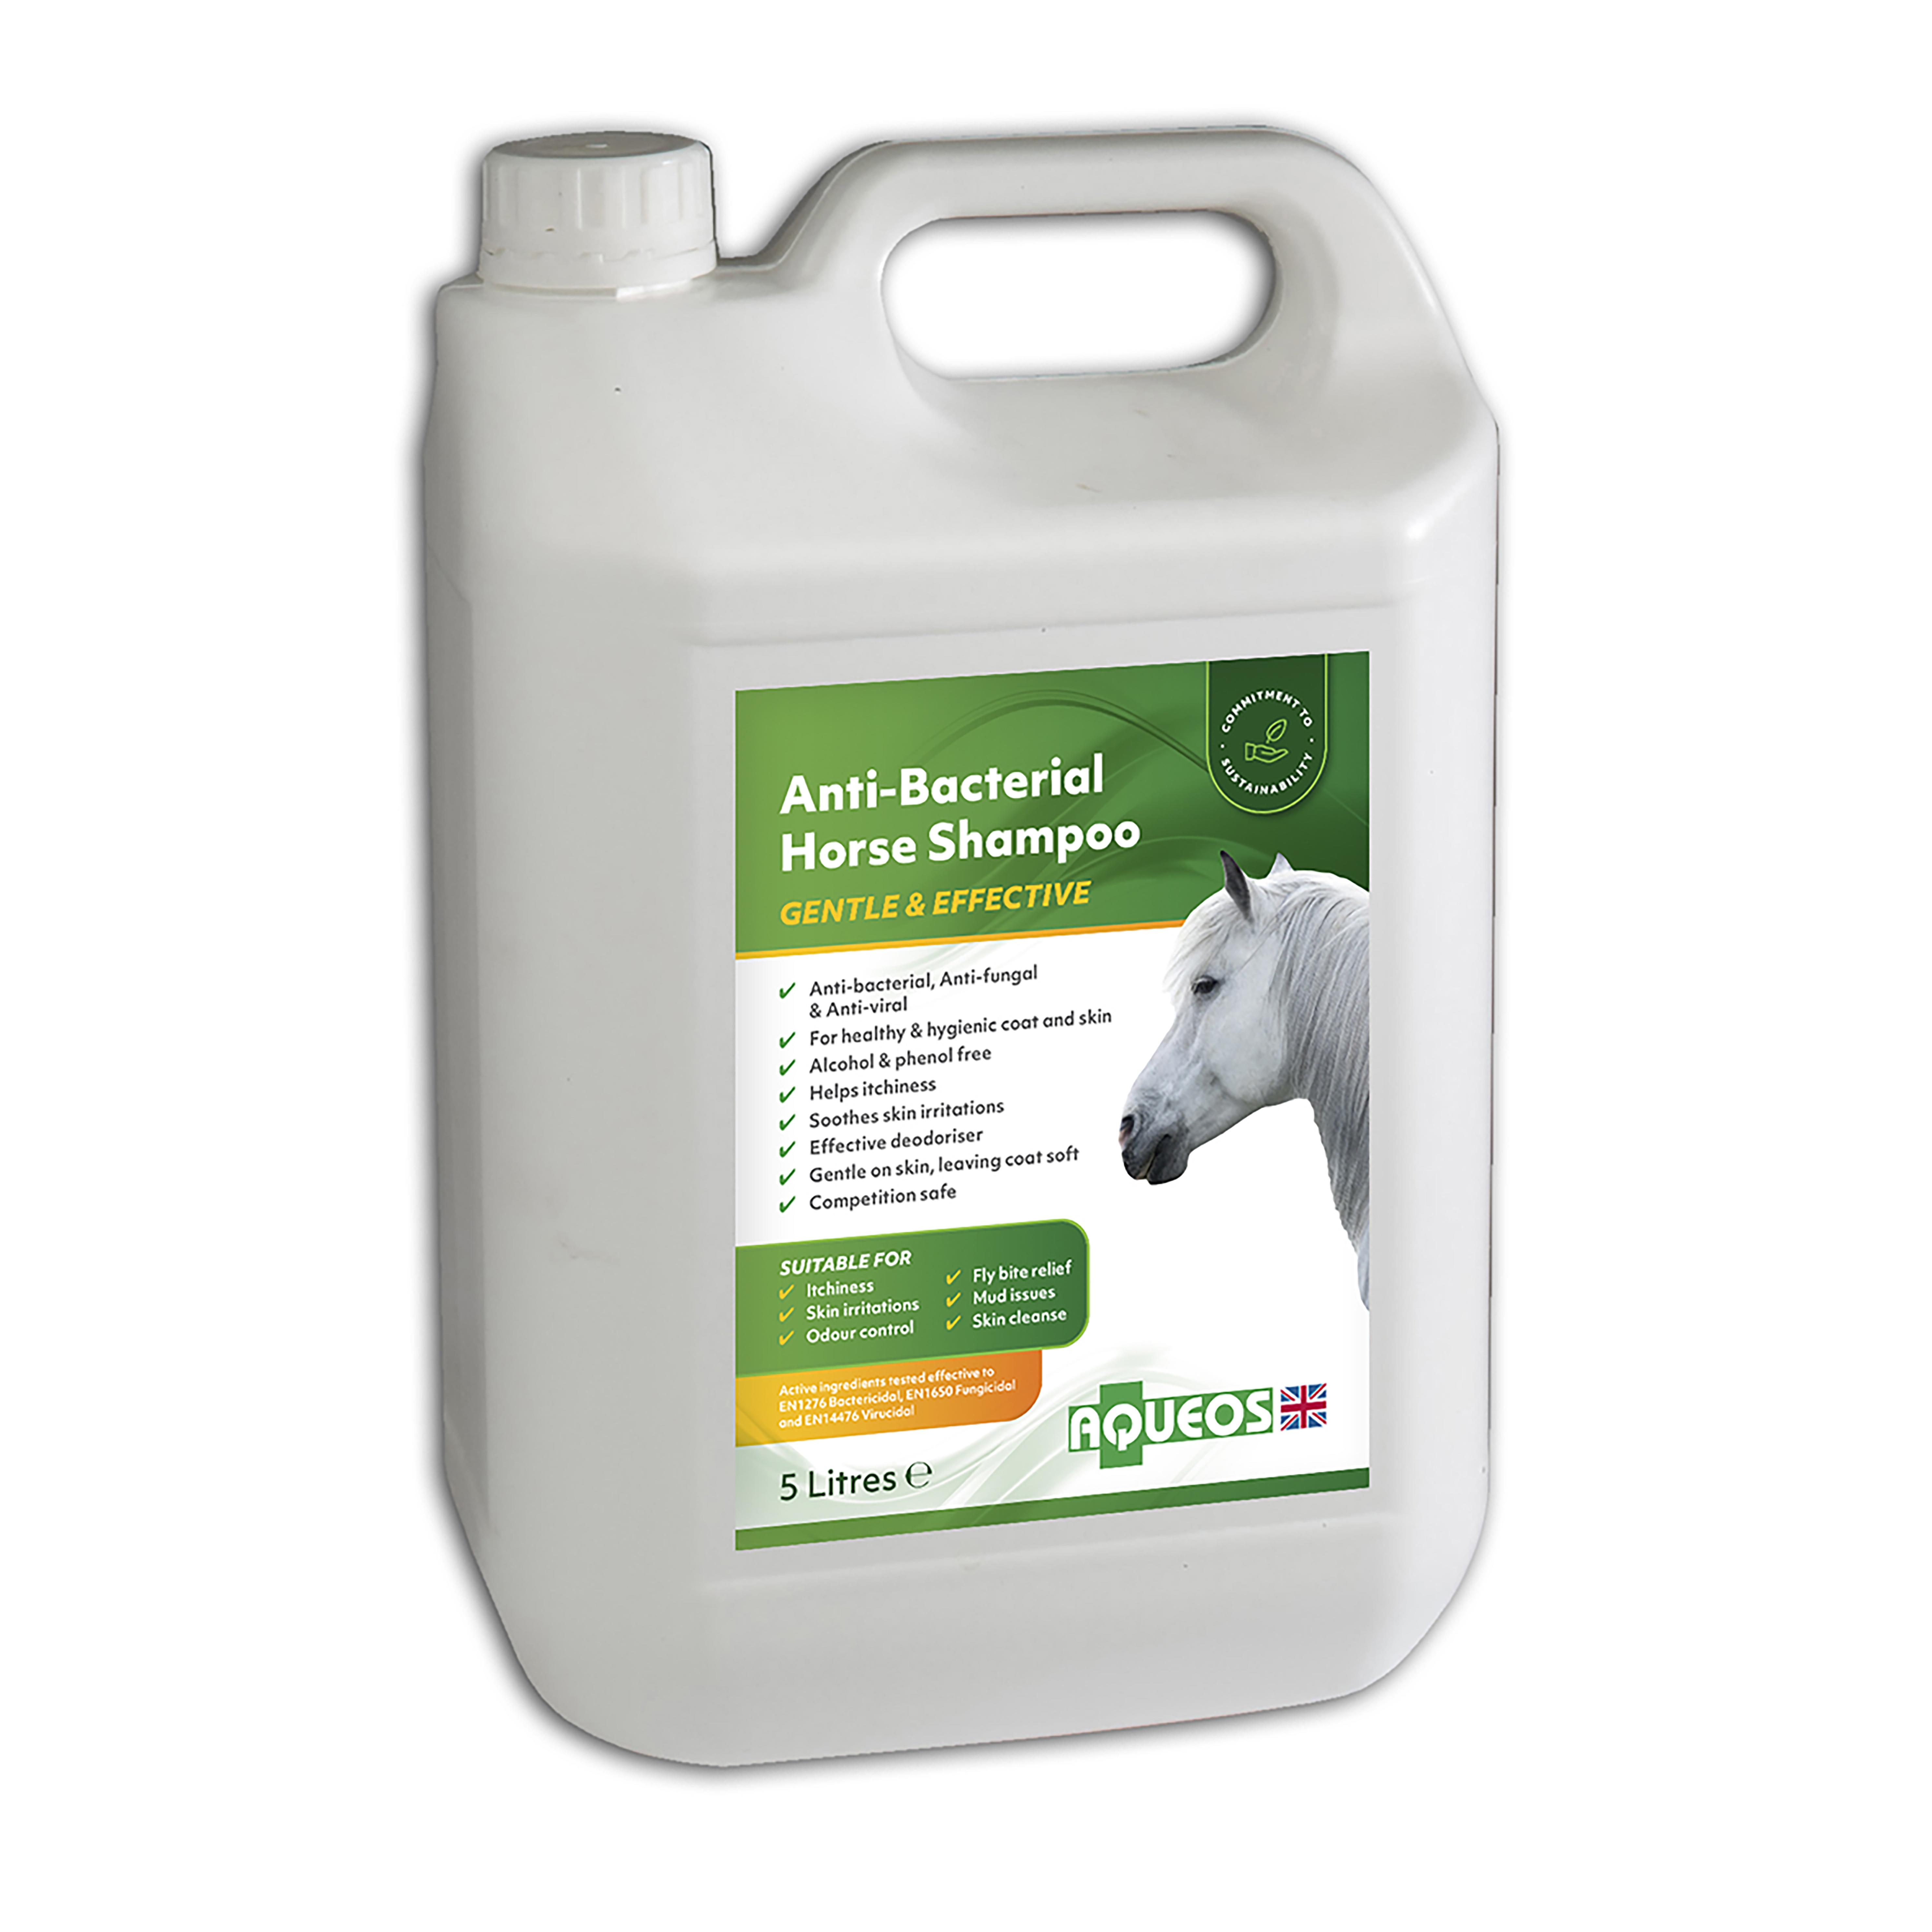 Anti-Bacterial, Anti-Fungal Horse Shampoo for itchy horses